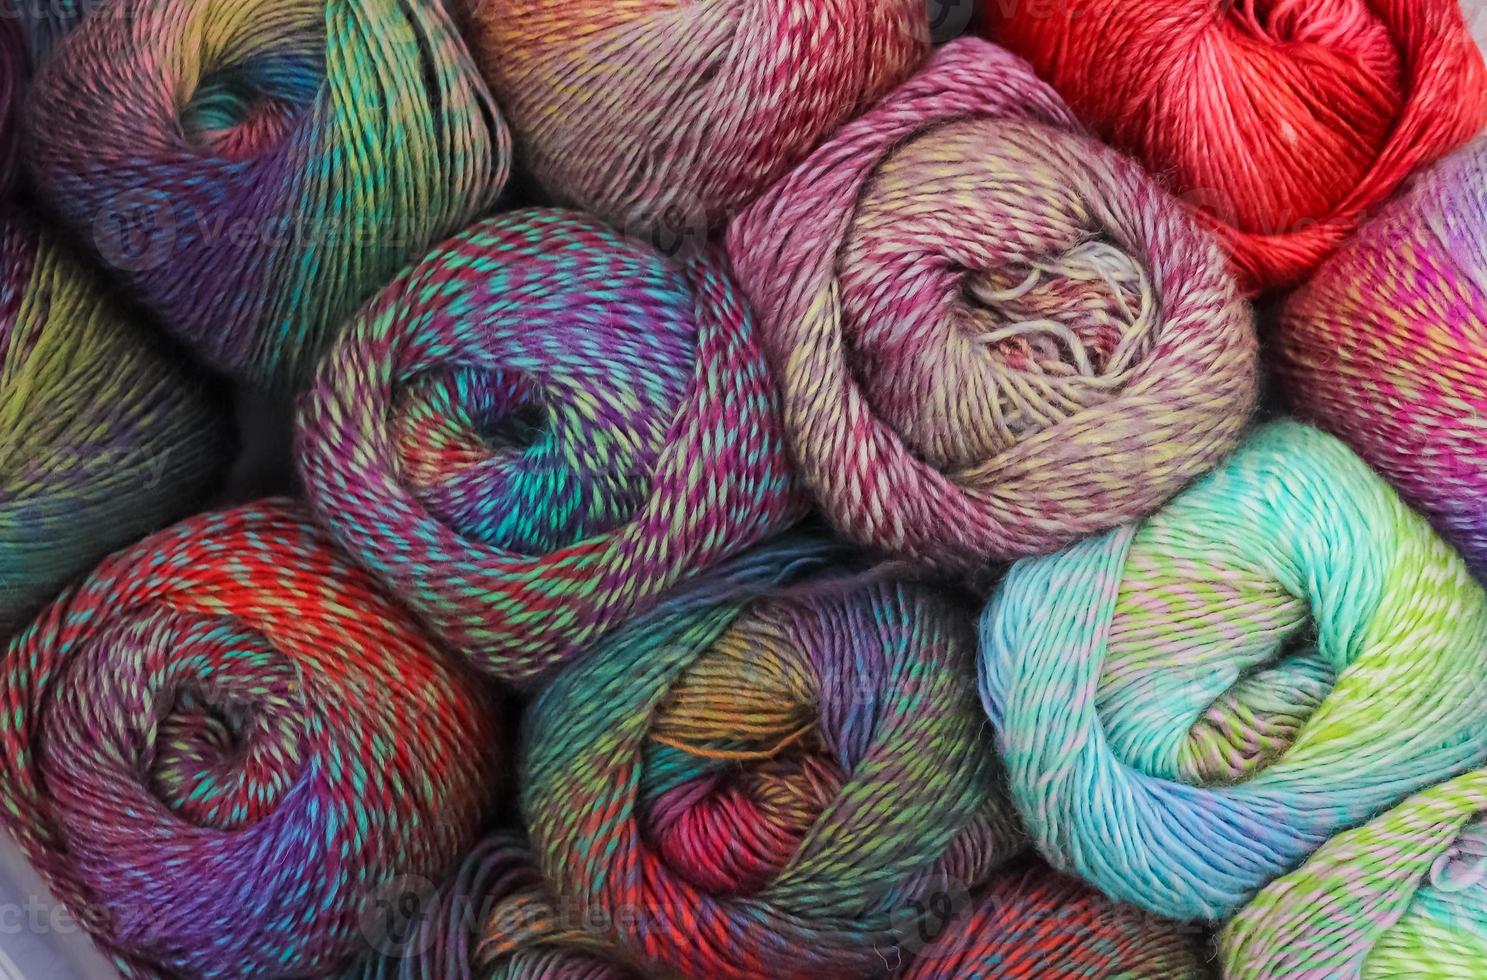 Several rolls of yarn picked up from above photo